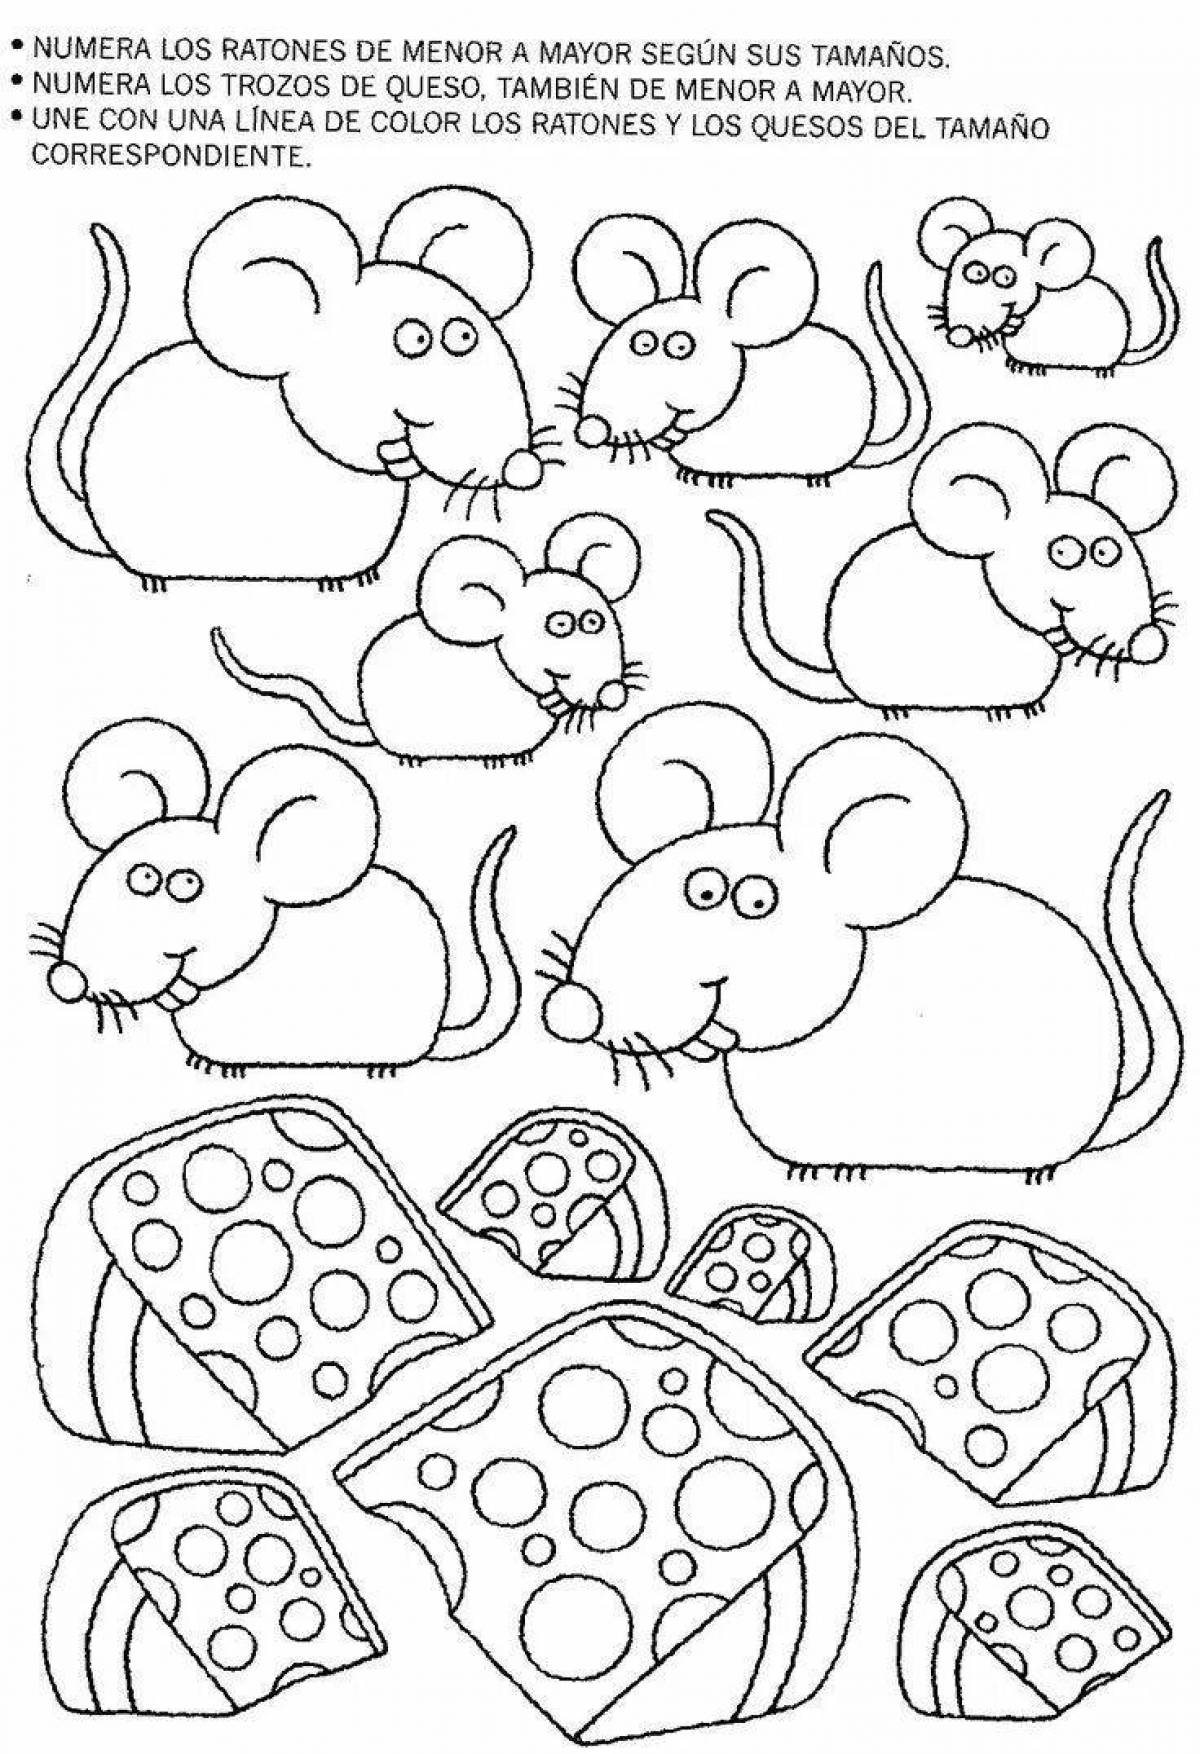 Coloring book bright mouse and bear